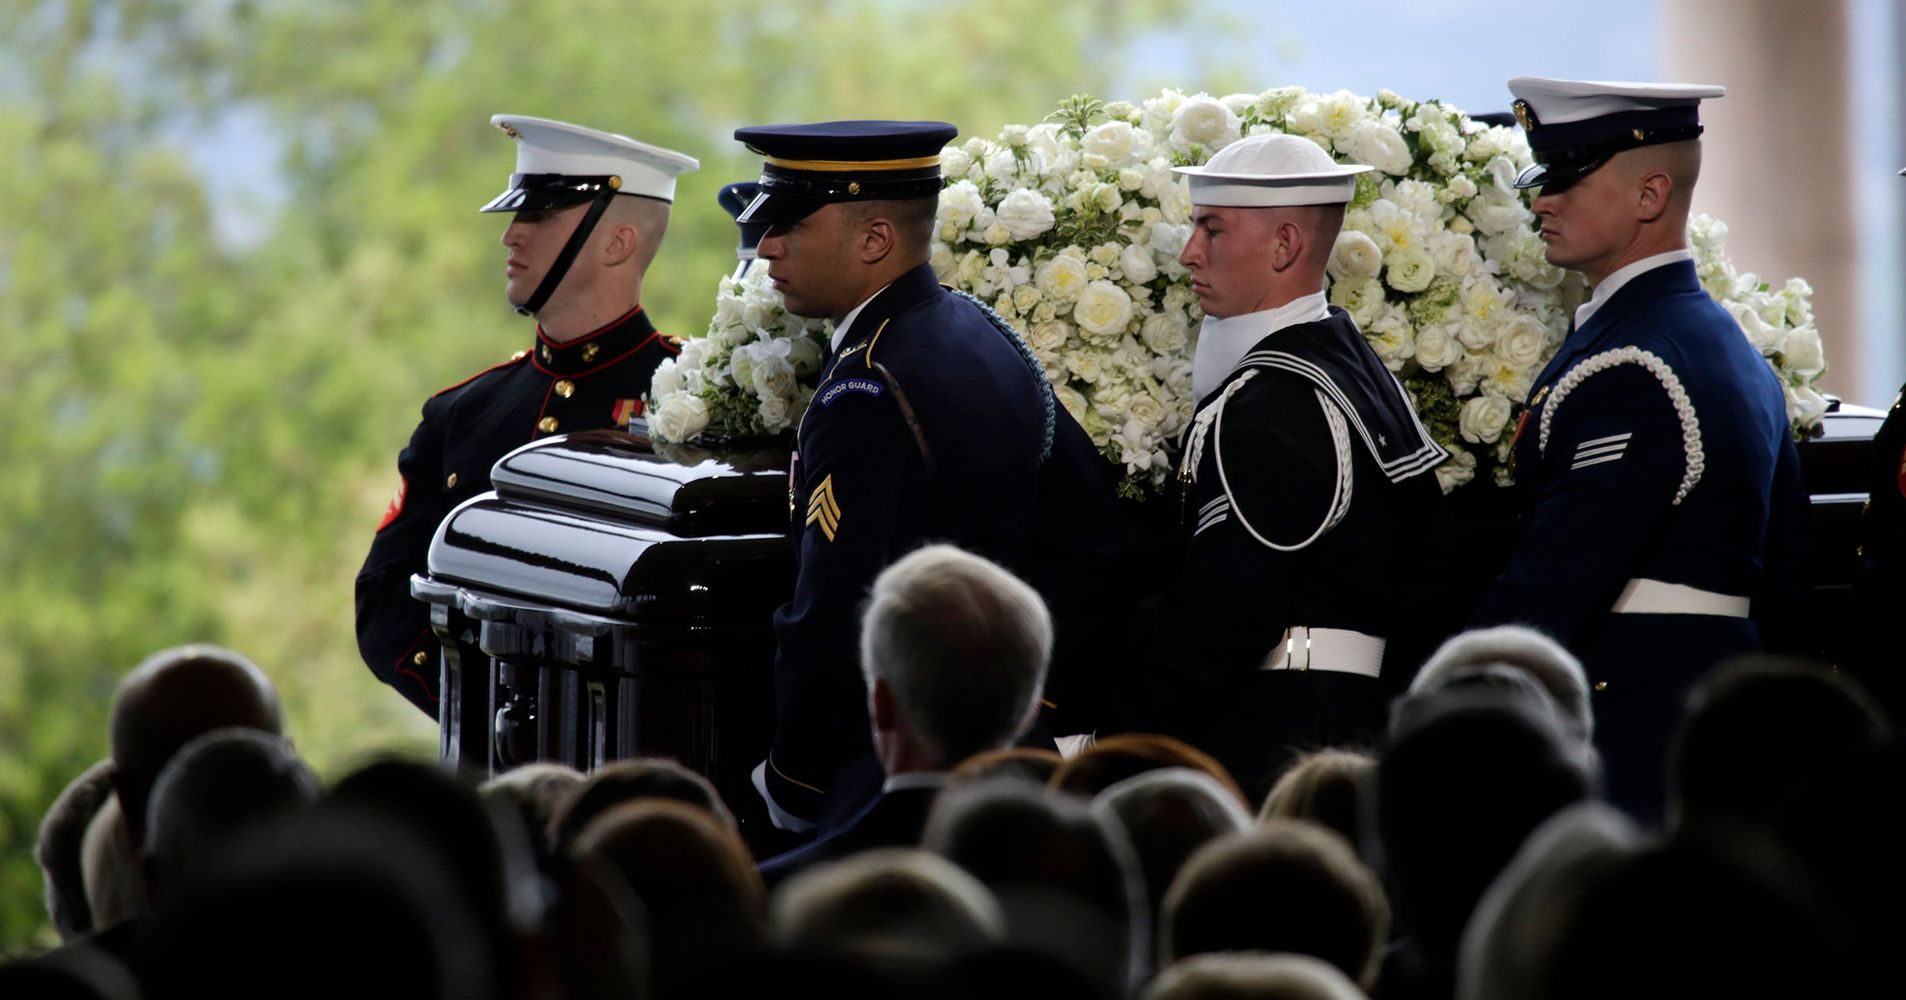 At The Funeral Of Nancy Reagan A Politically Divided America Came Together Huffpost 